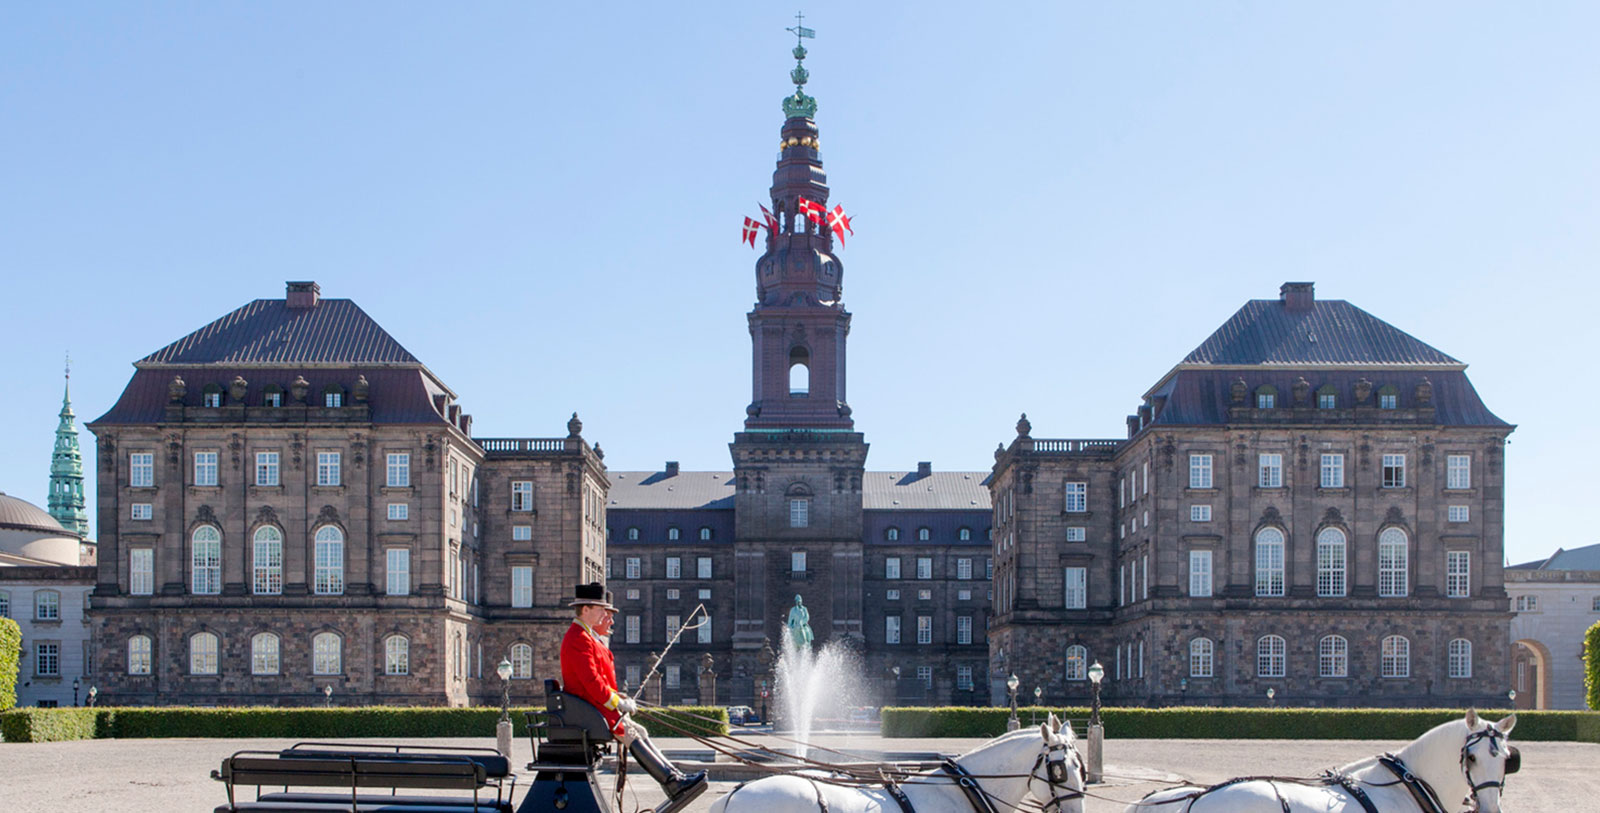 Explore the Christiansborg Palace (Christiansborg Slot) just moments down the road.